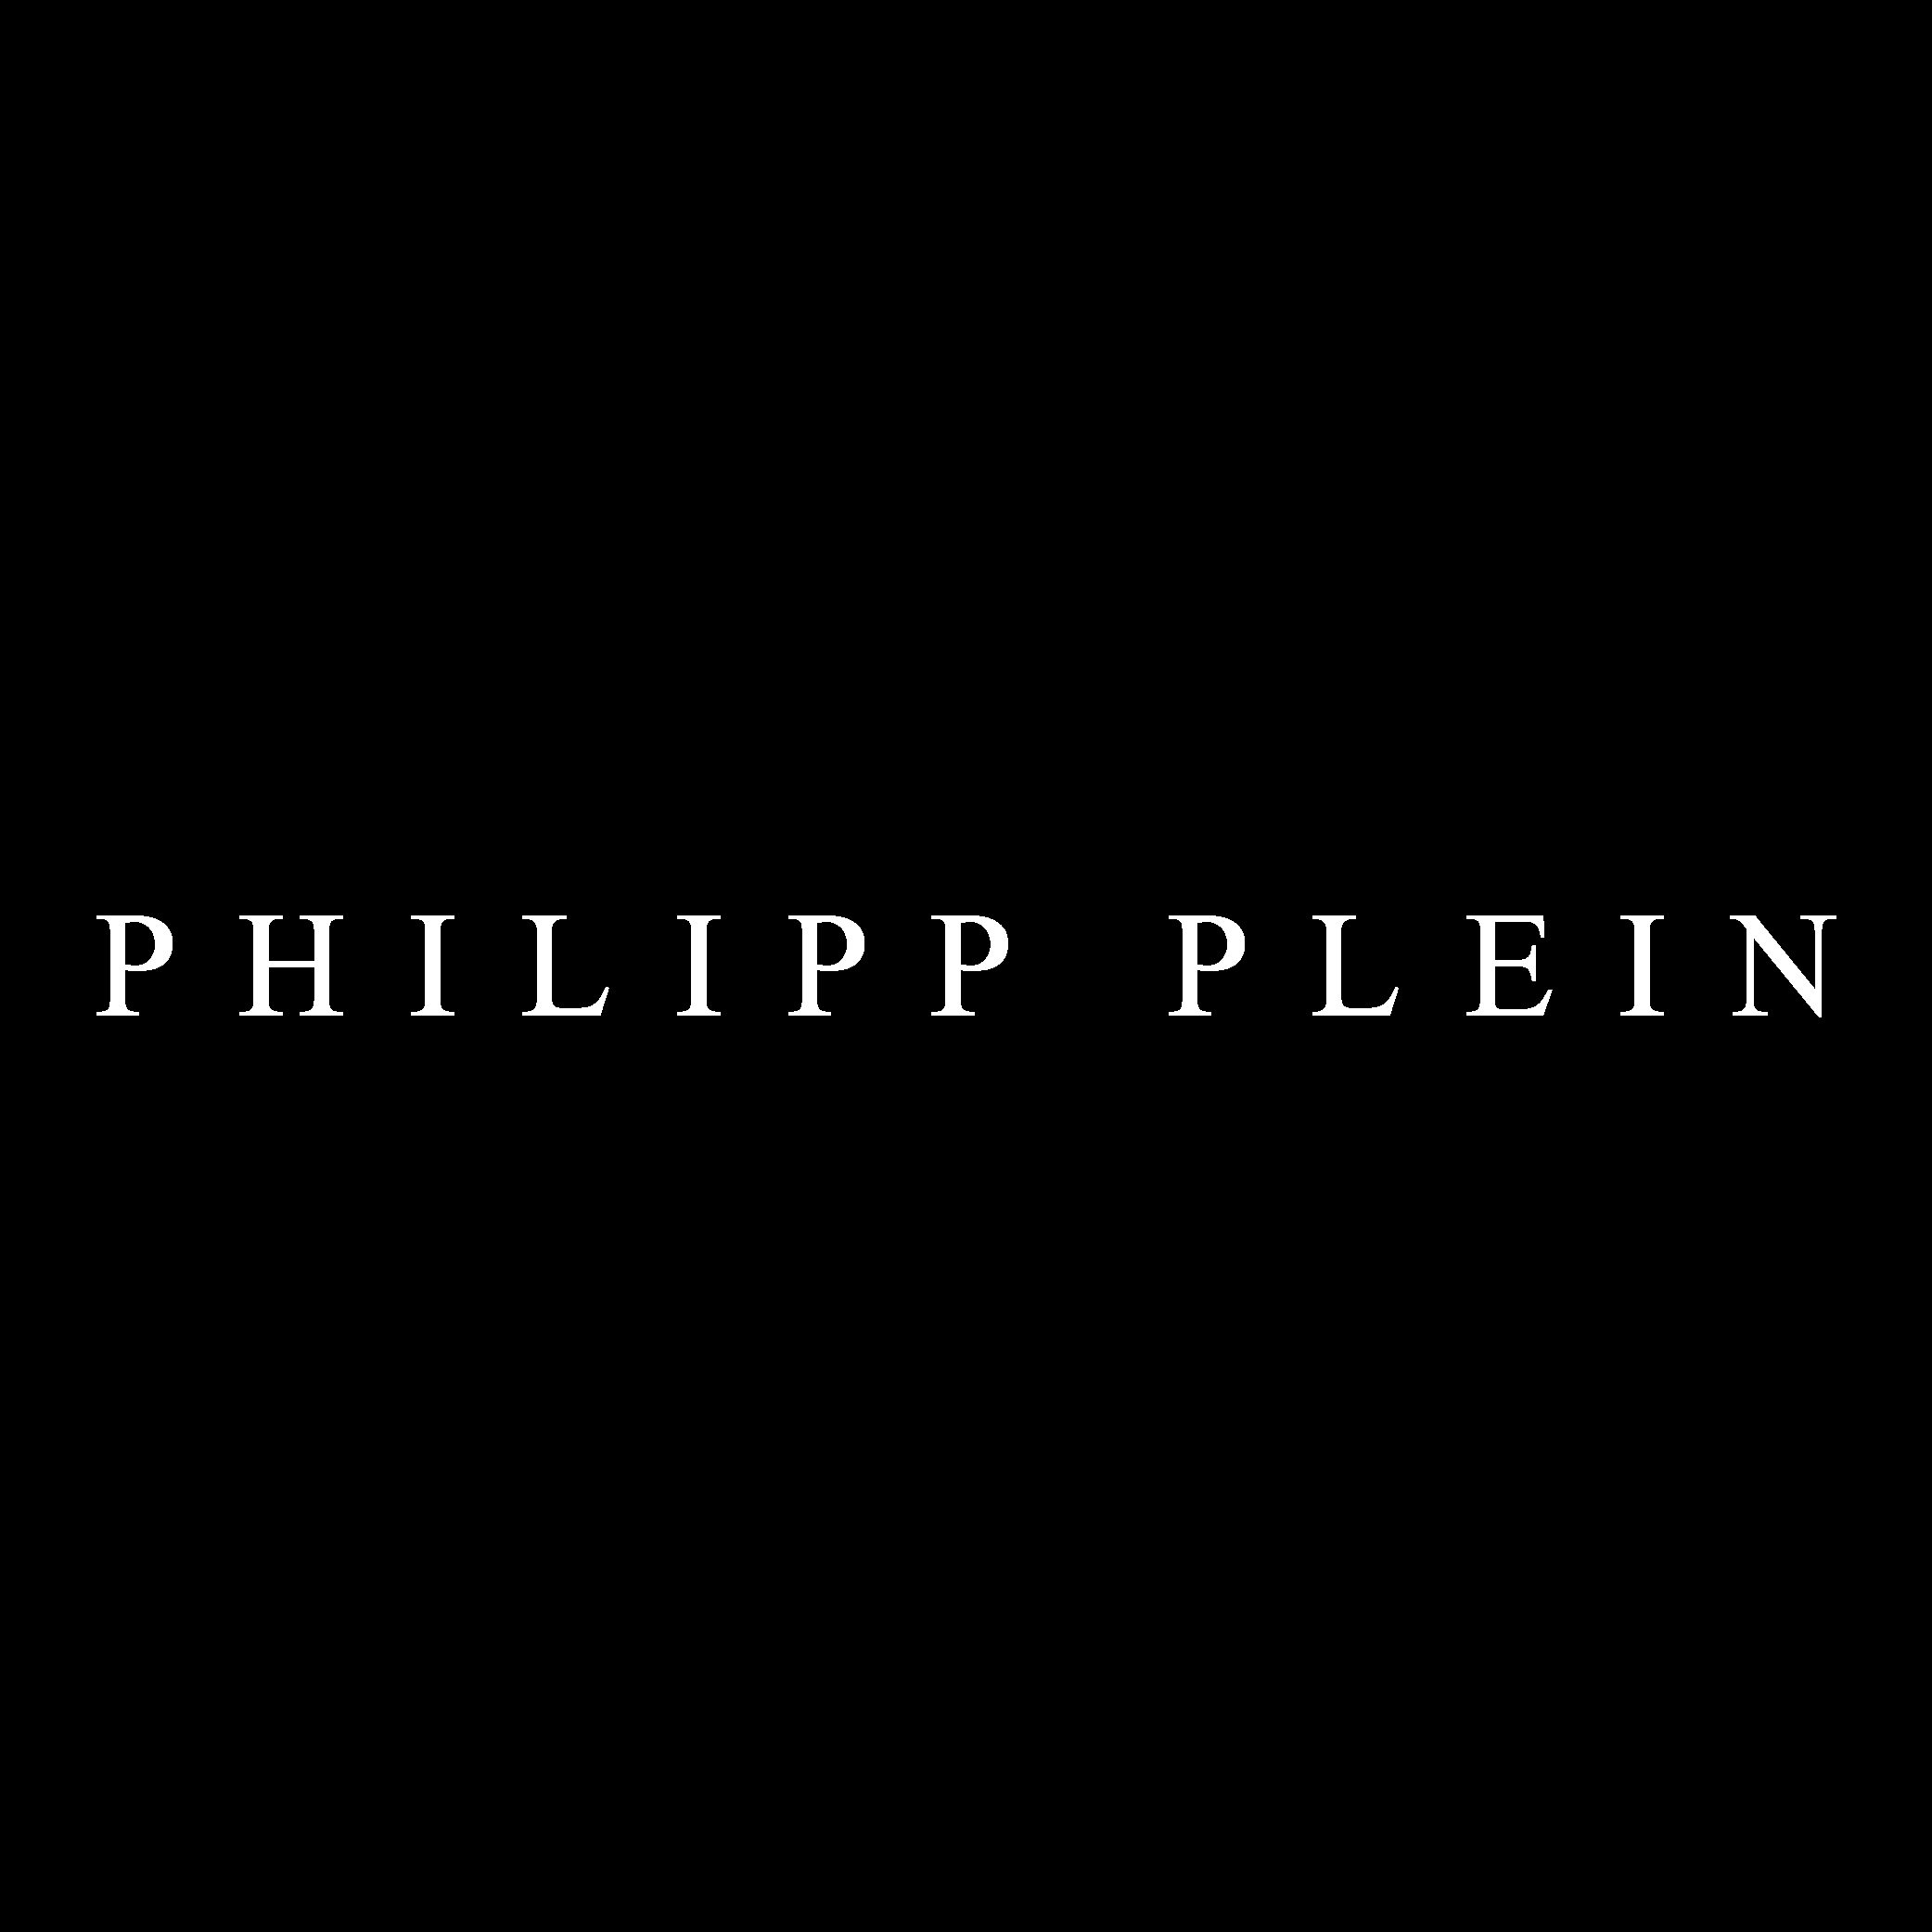 Illuminated channel letters and logo with inox pages - Philipp Plein